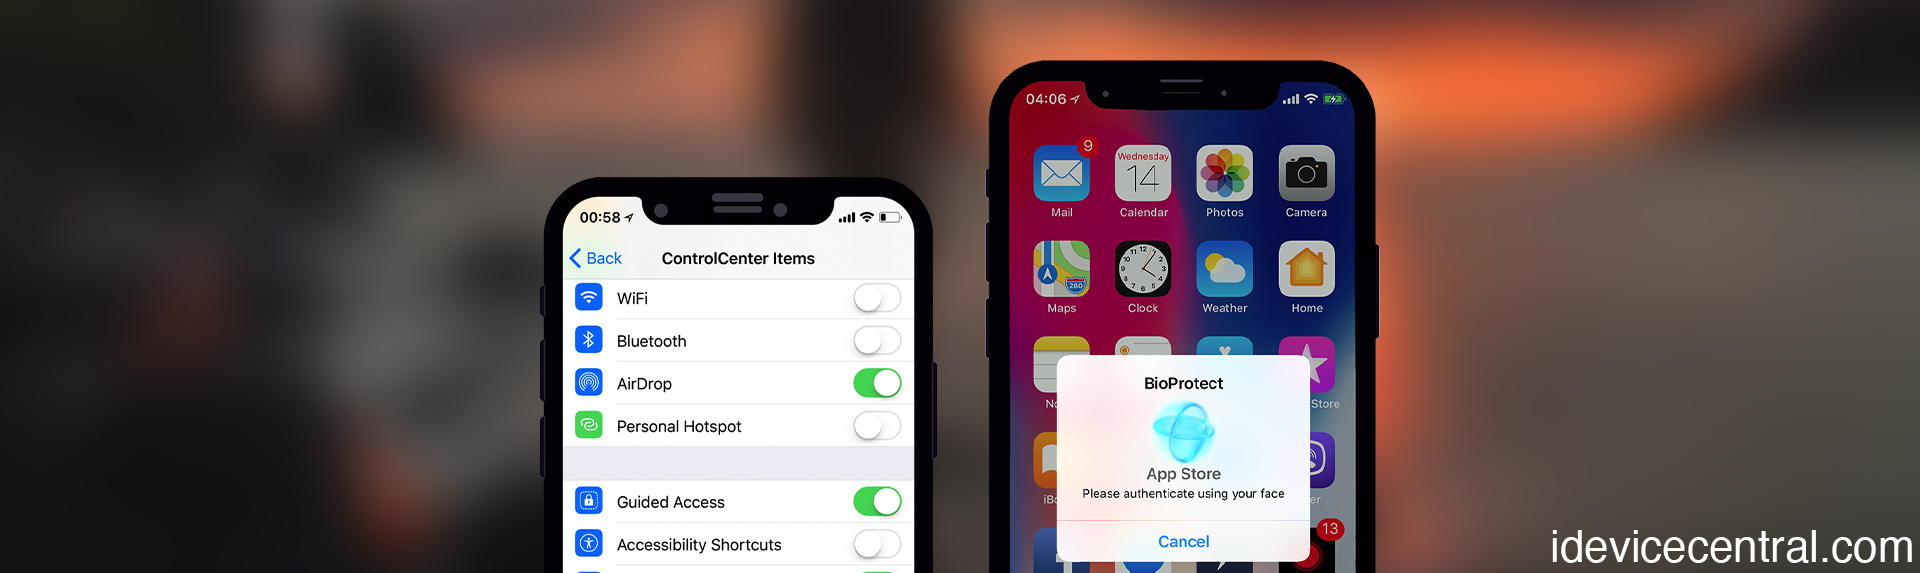 BioProtect XS Tweak: Protect iOS Apps With FaceID / TouchID iOS 12 - 16